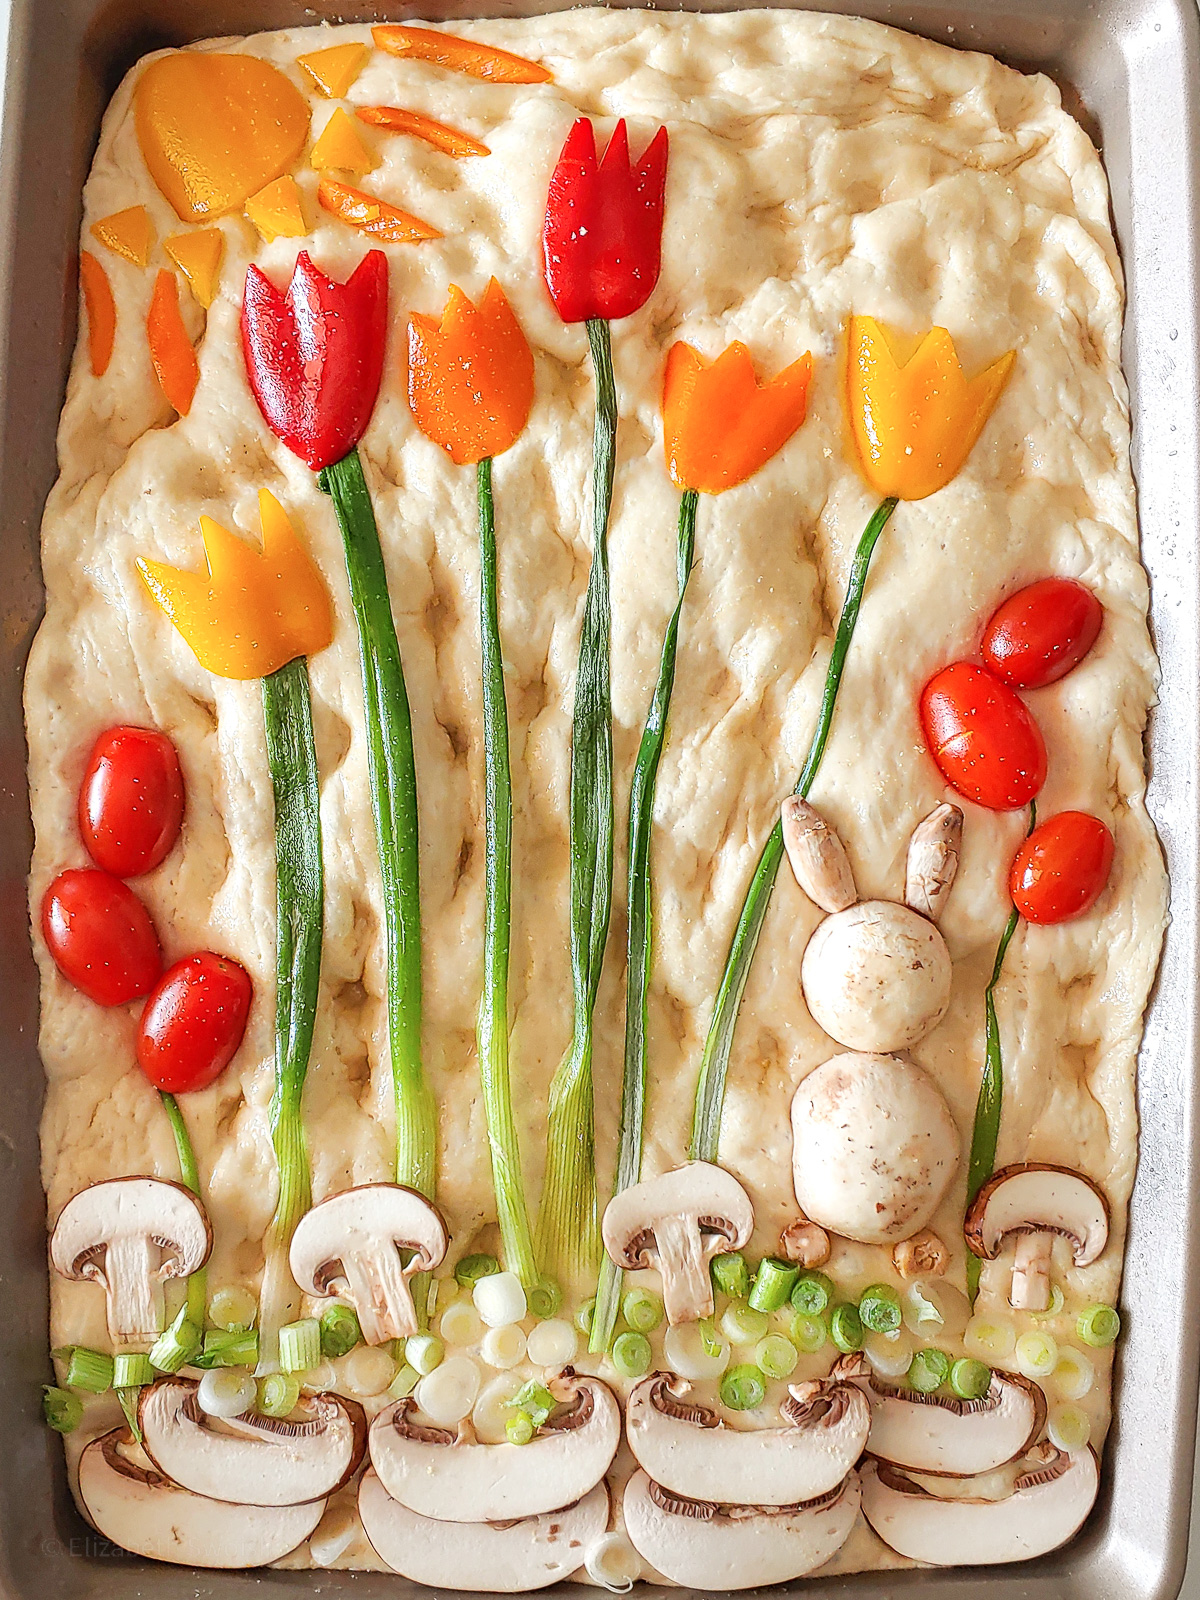 Decorated Easter No Knead Focaccia bread. Bell peppers carved into tulips and sun, mushrooms made into bunnies and ground. chopped green onions as grass and stems.